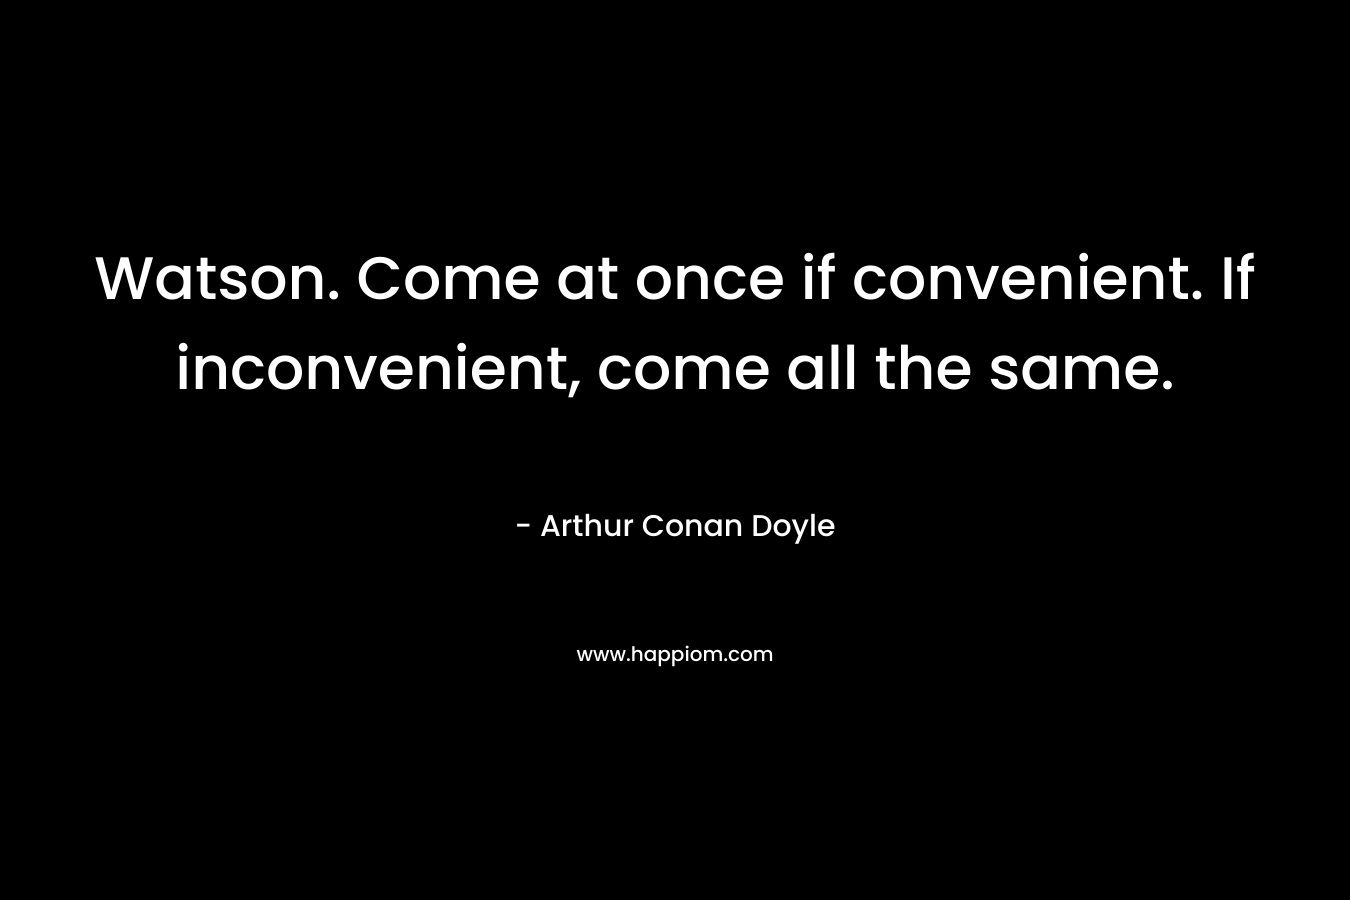 Watson. Come at once if convenient. If inconvenient, come all the same. – Arthur Conan Doyle